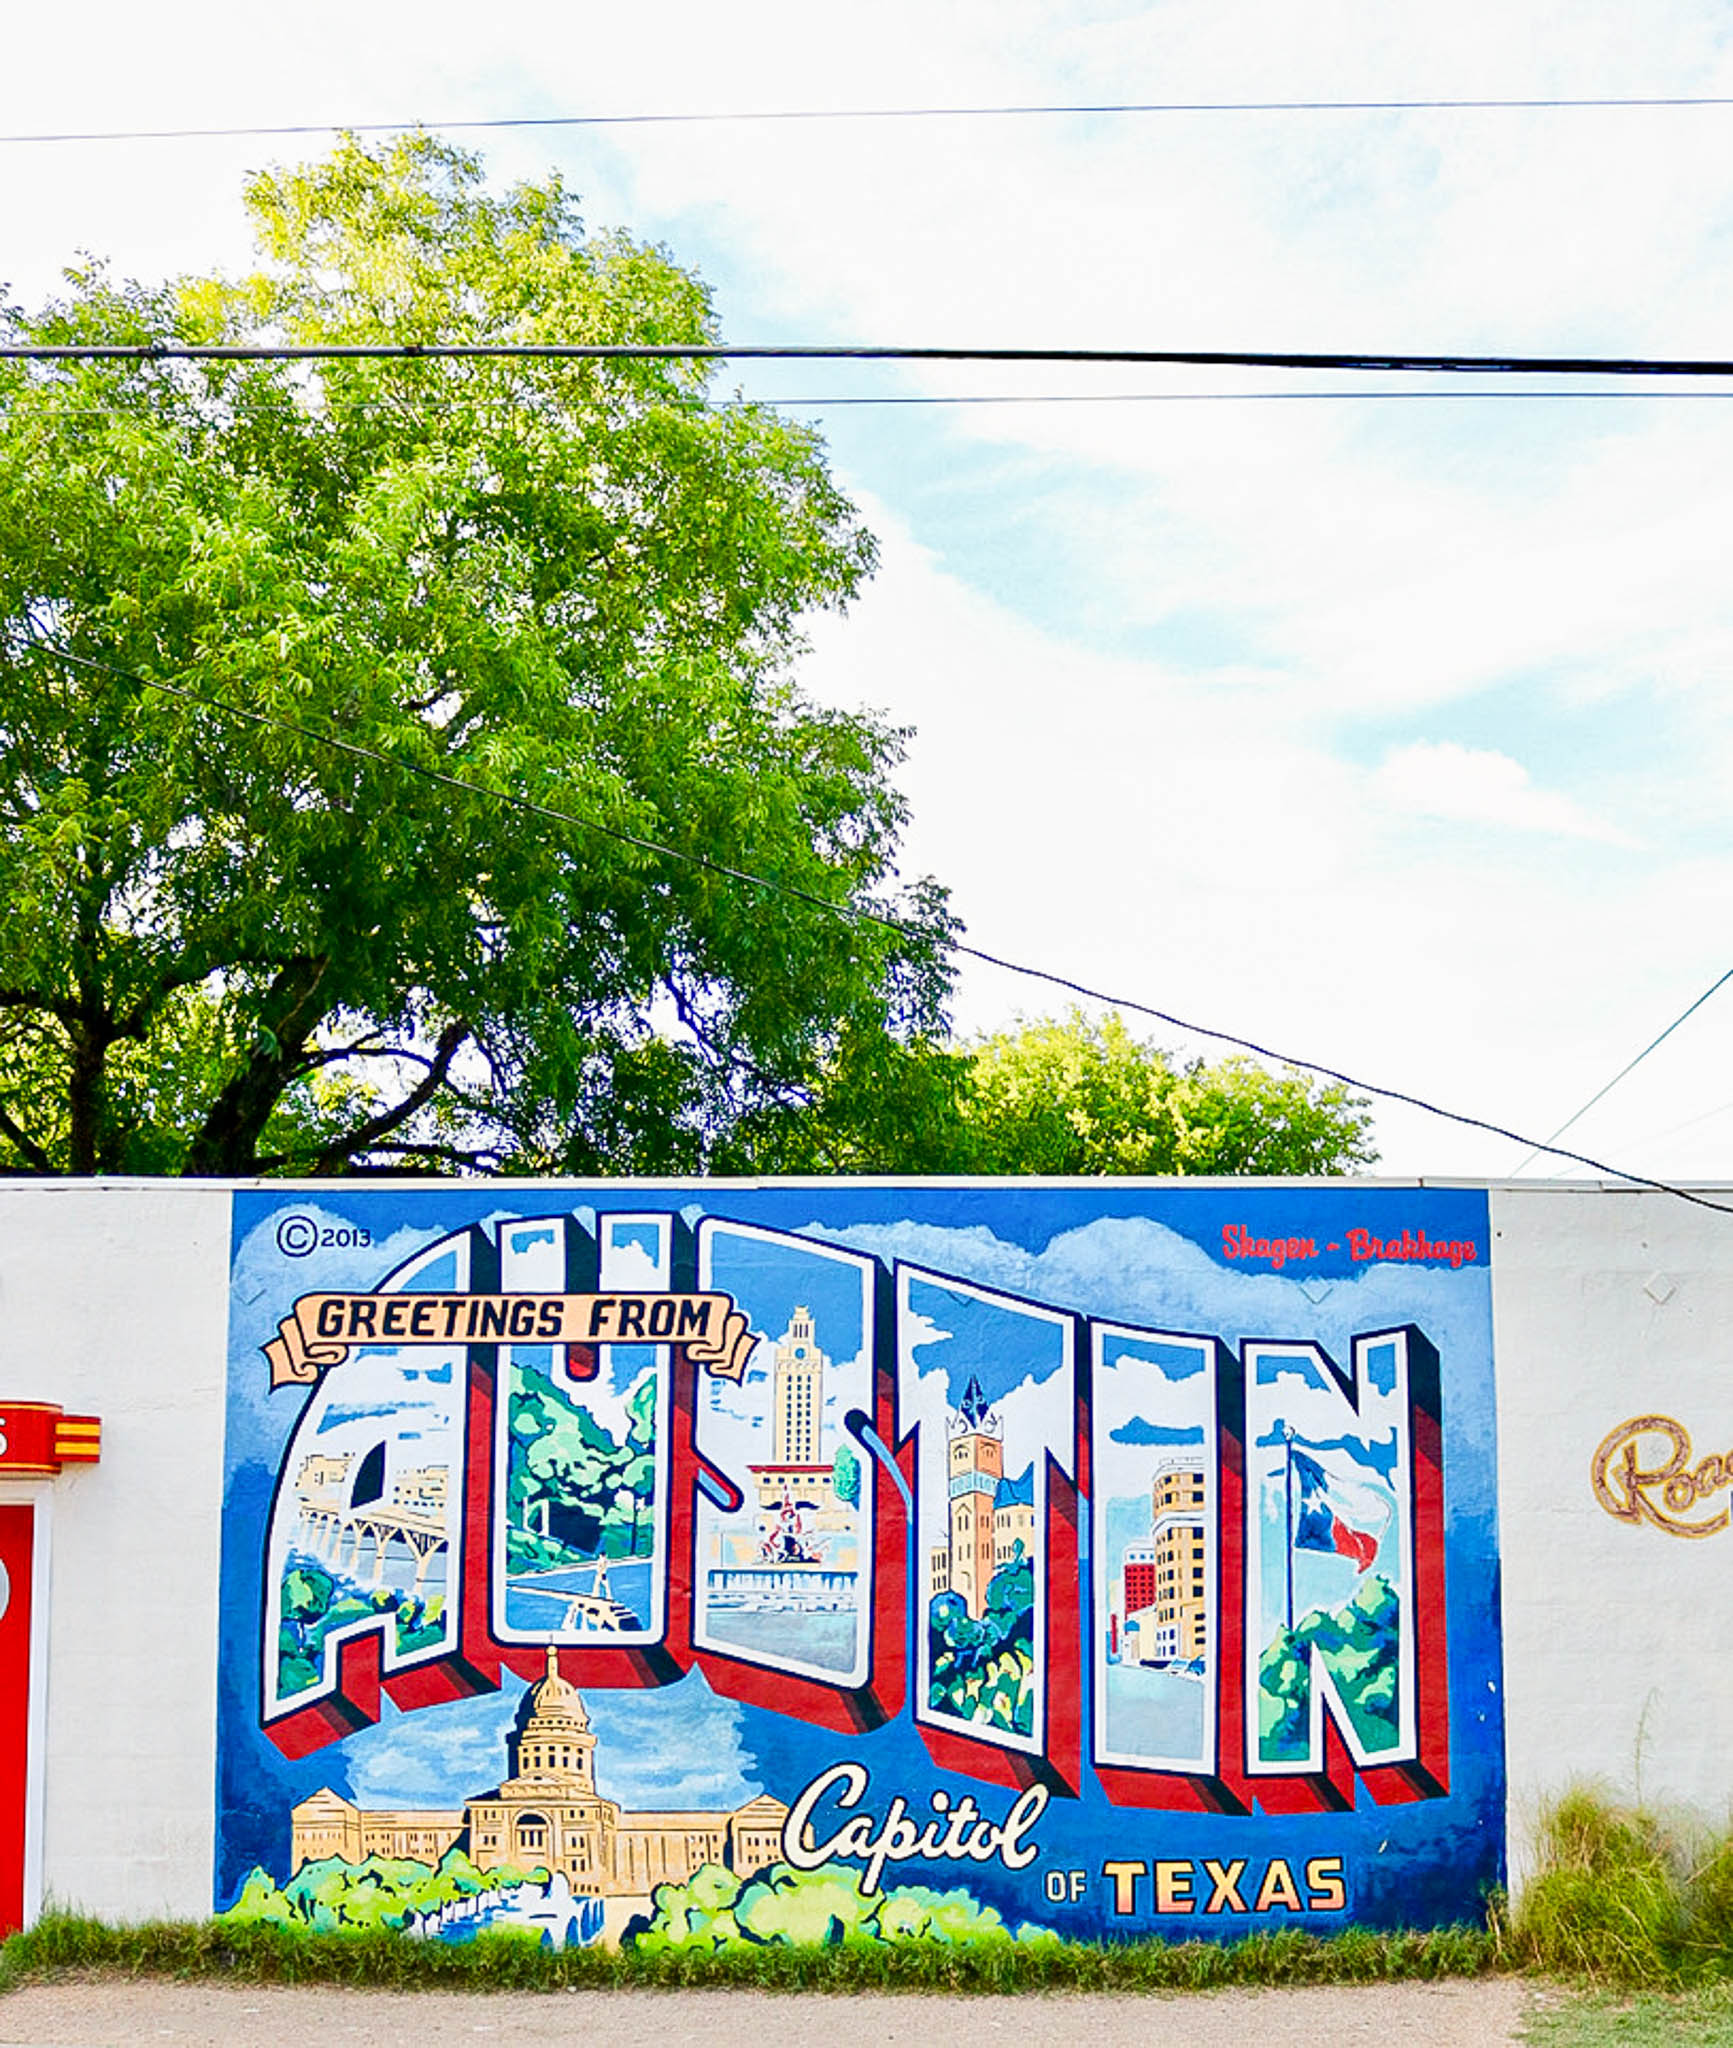 GREETINGS FROM AUSTIN - 101 free things to do in ATX!